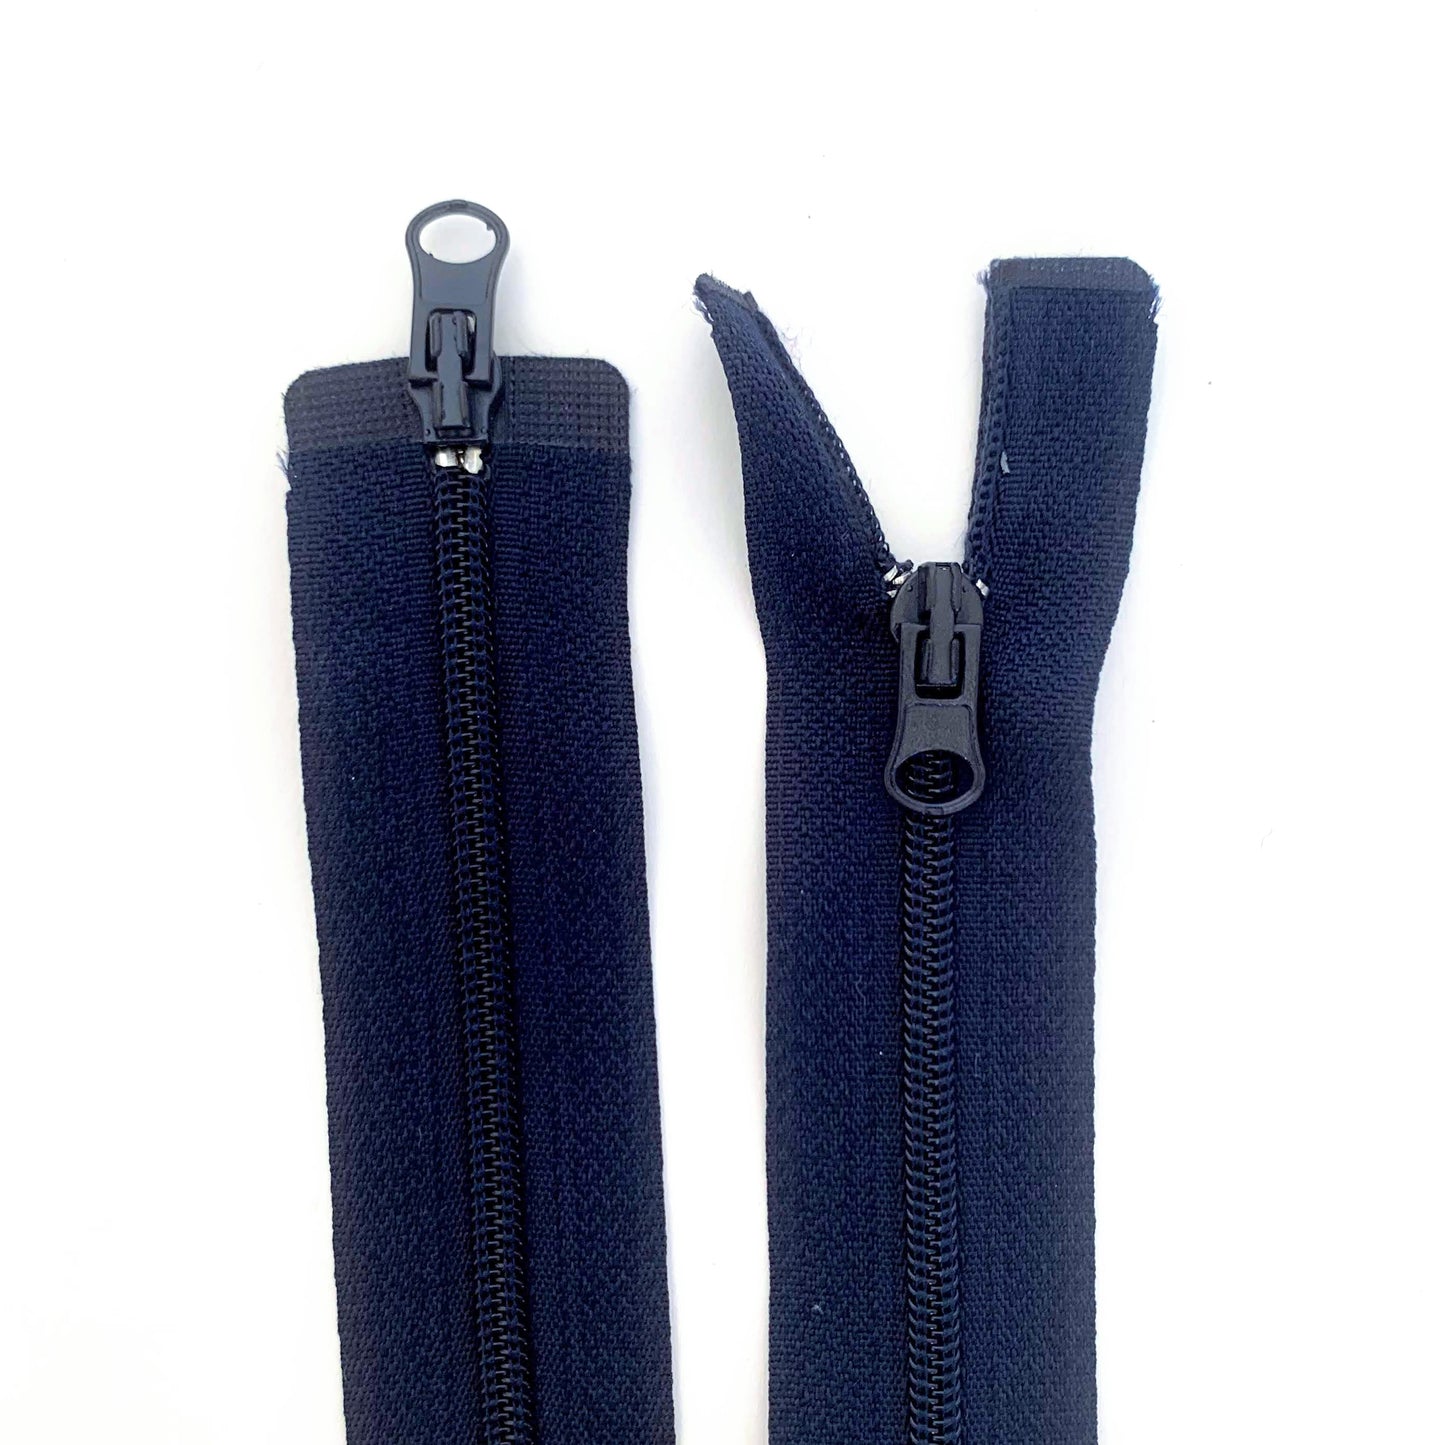 Two Way Separating Zipper - Light Weight #3 Nylon Coil 76cm (30") - Navy